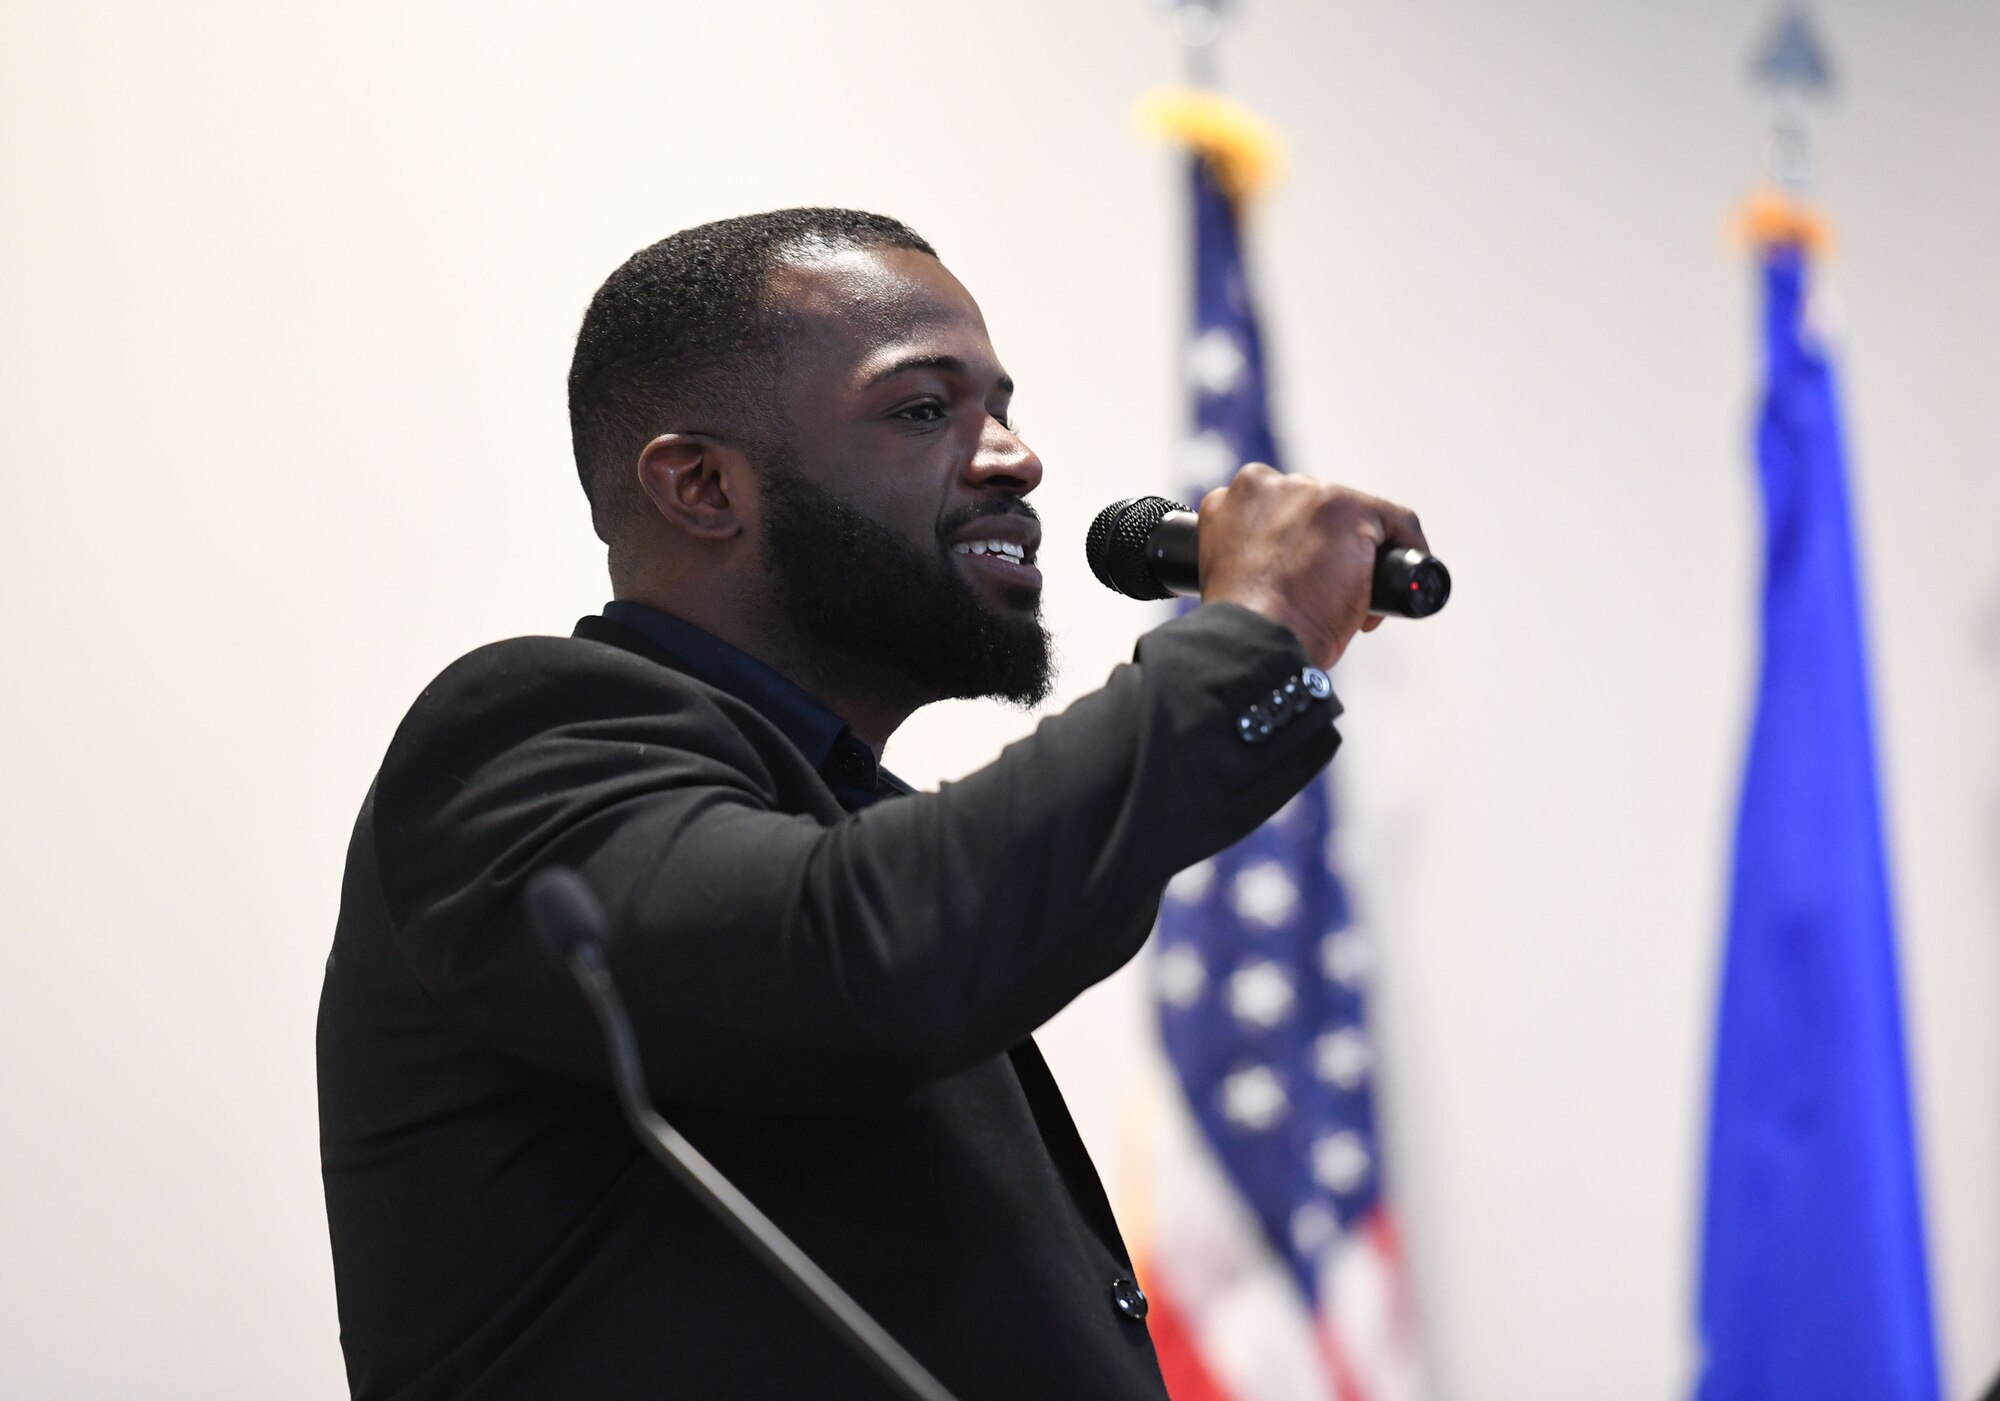 Josiah Ward performs a song selection during the annual Dr. Martin Luther King Jr. Luncheon inside the Roberts Consolidated Aircraft Maintenance Facility at Keesler Air Force Base, Mississippi, Jan. 30, 2023.